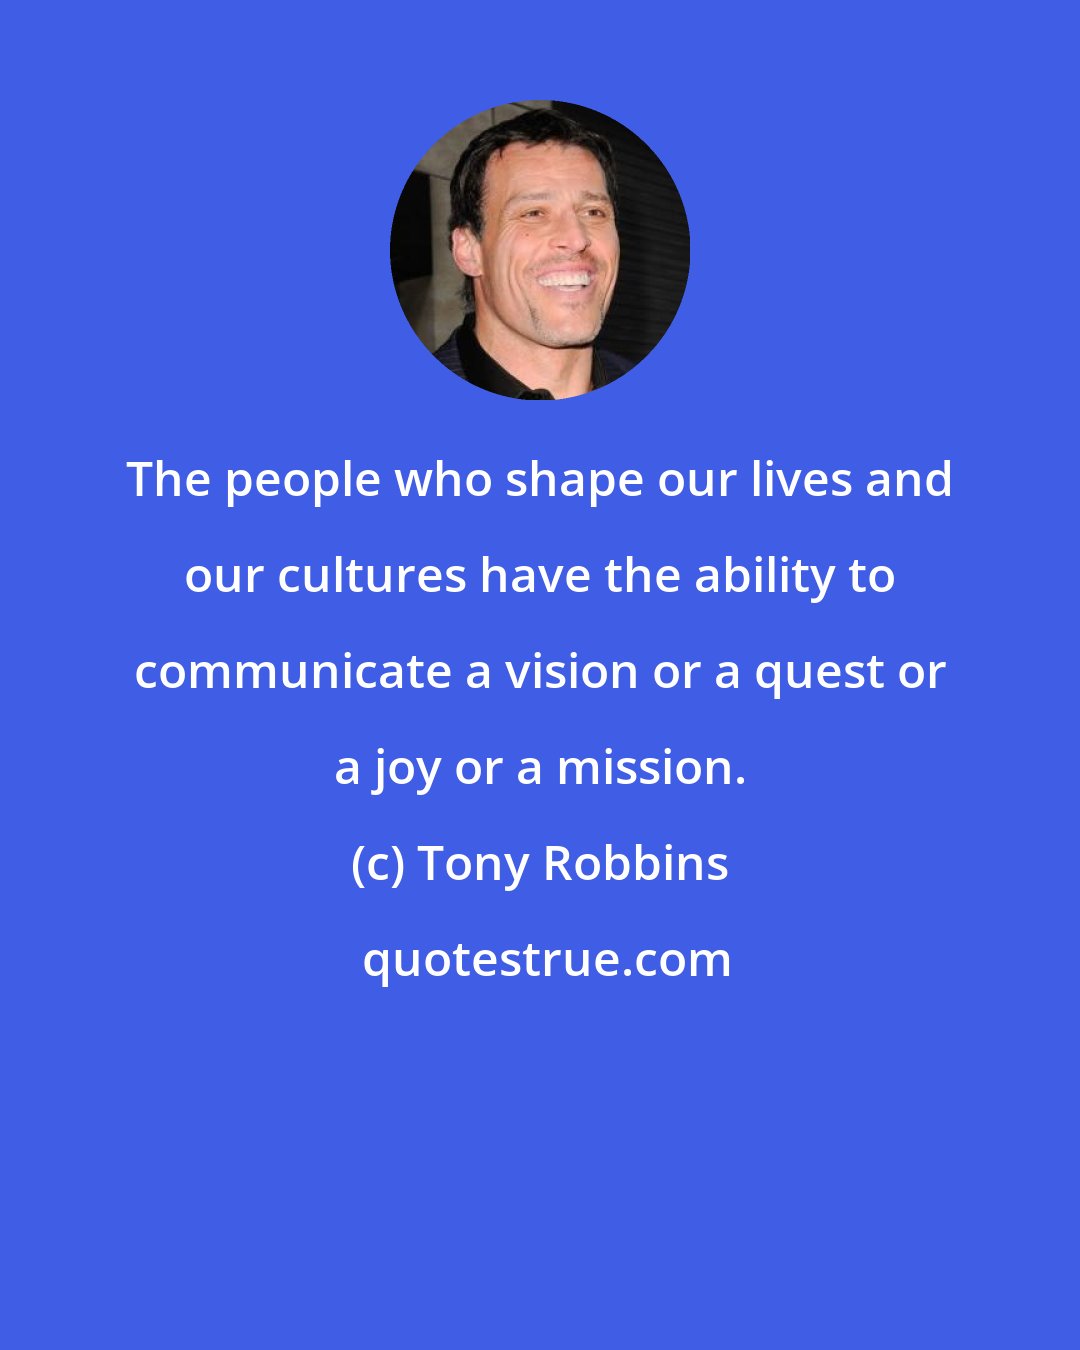 Tony Robbins: The people who shape our lives and our cultures have the ability to communicate a vision or a quest or a joy or a mission.